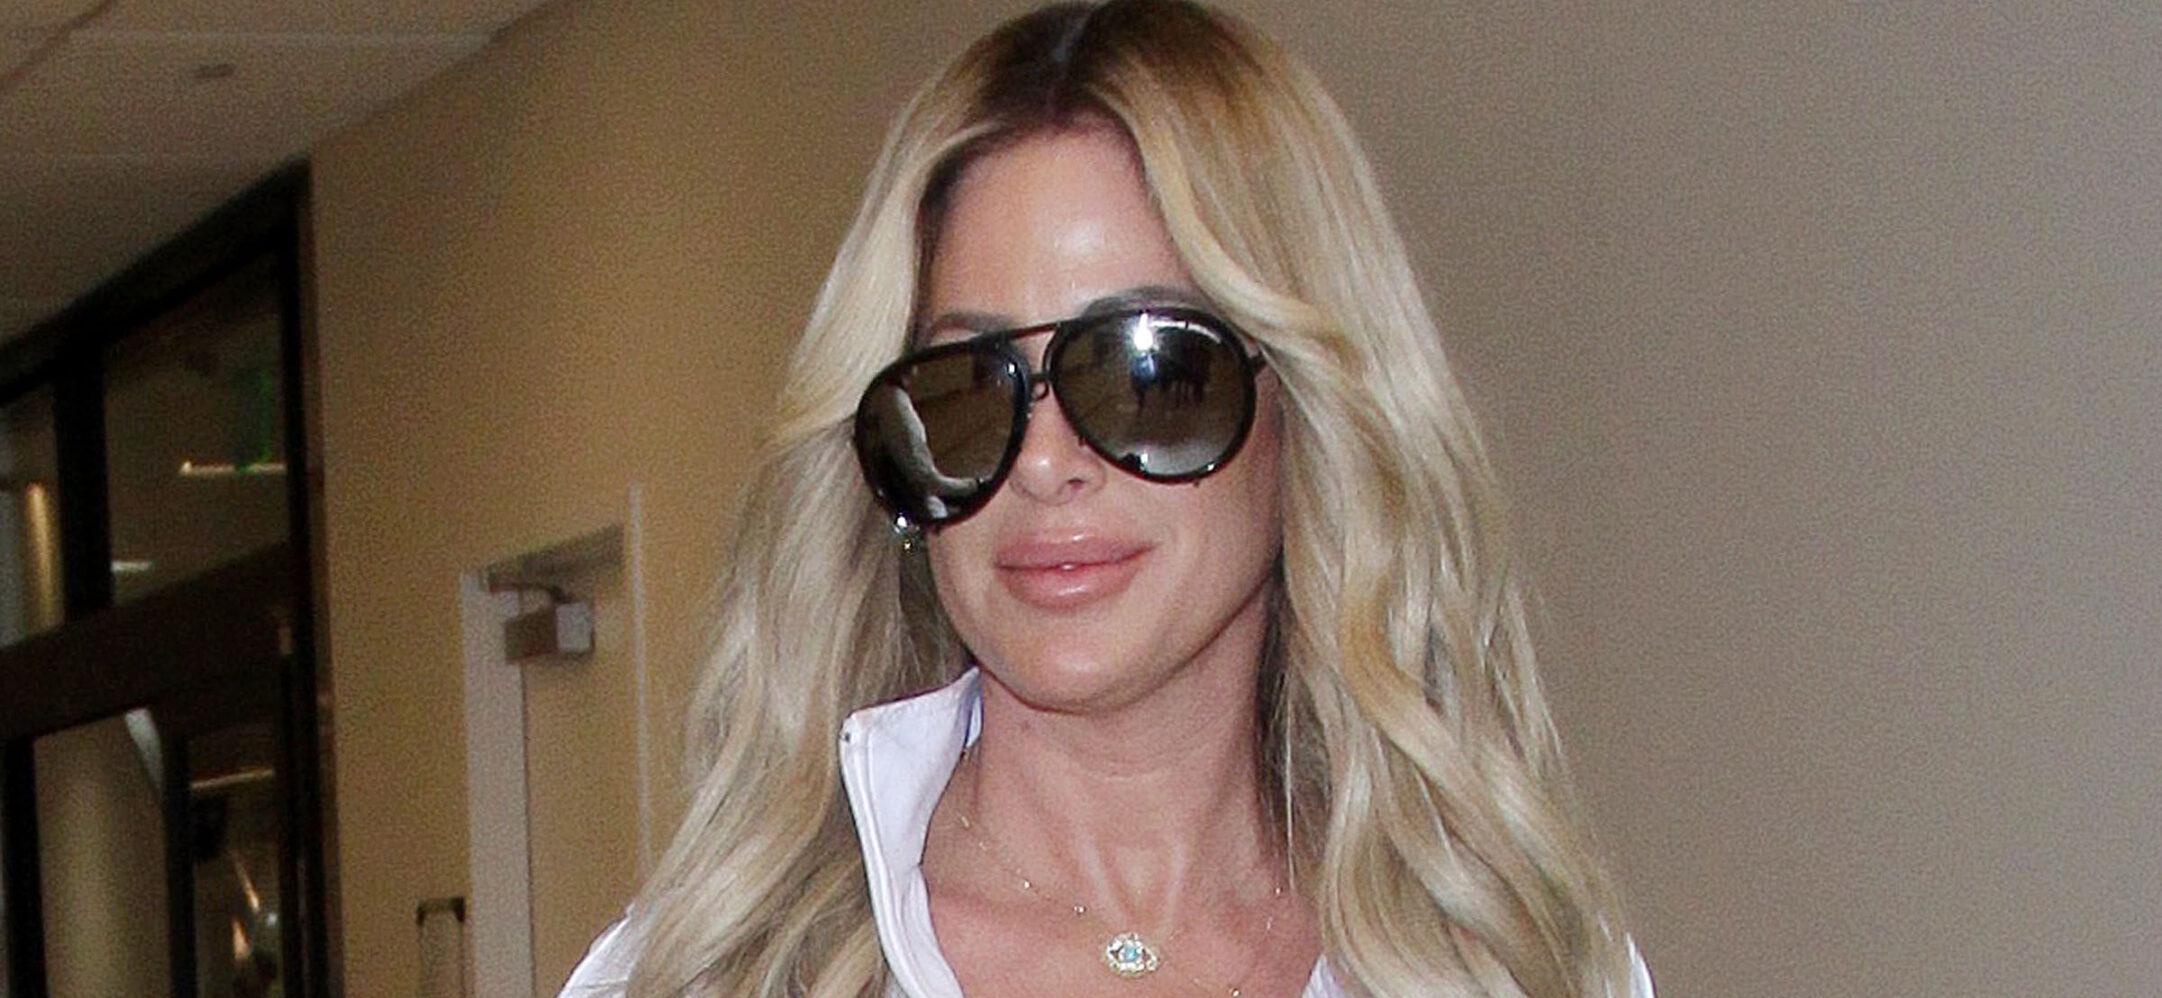 Kim Zolciak Puts ‘Summer Ready’ Body On Display Amid Contentious Divorce